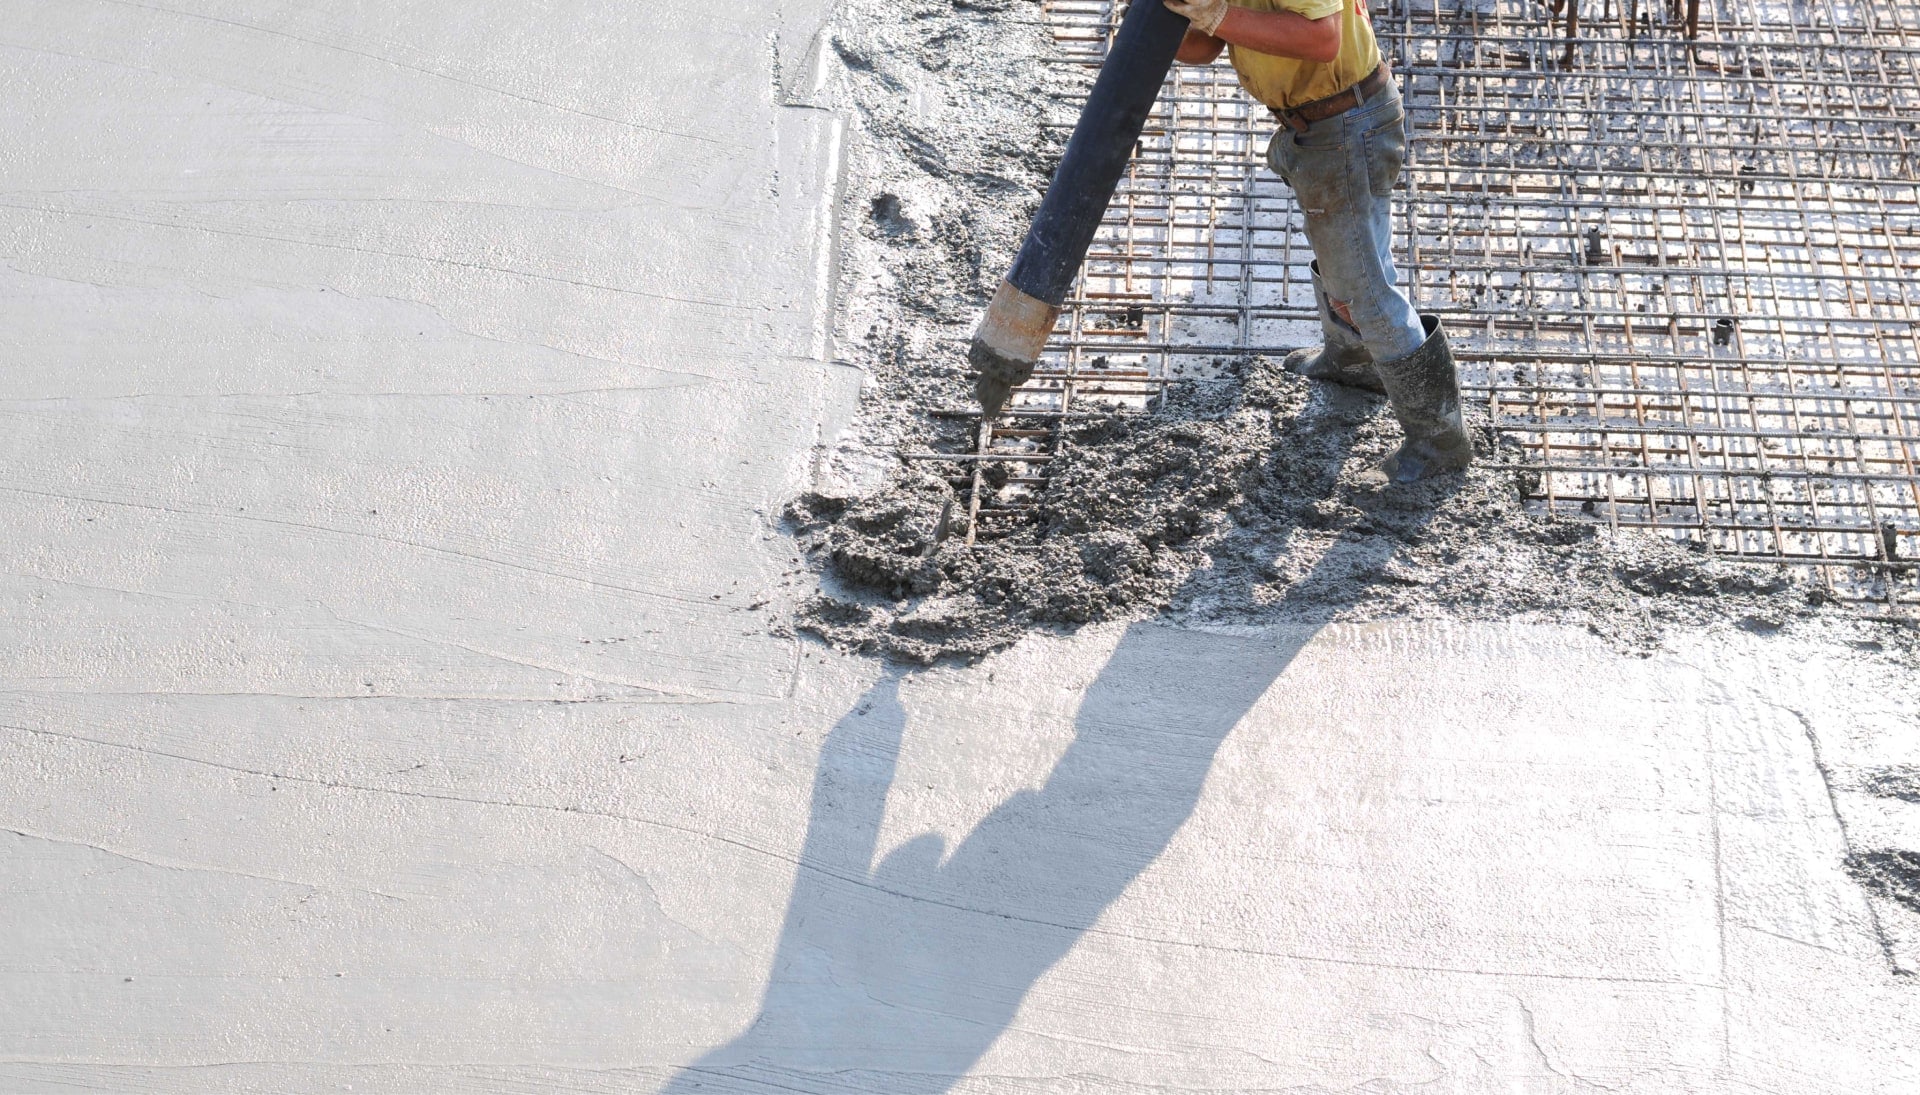 High-Quality Concrete Foundation Services Holland Trust Experienced Contractors for Strong Concrete Foundations for Residential or Commercial Projects.